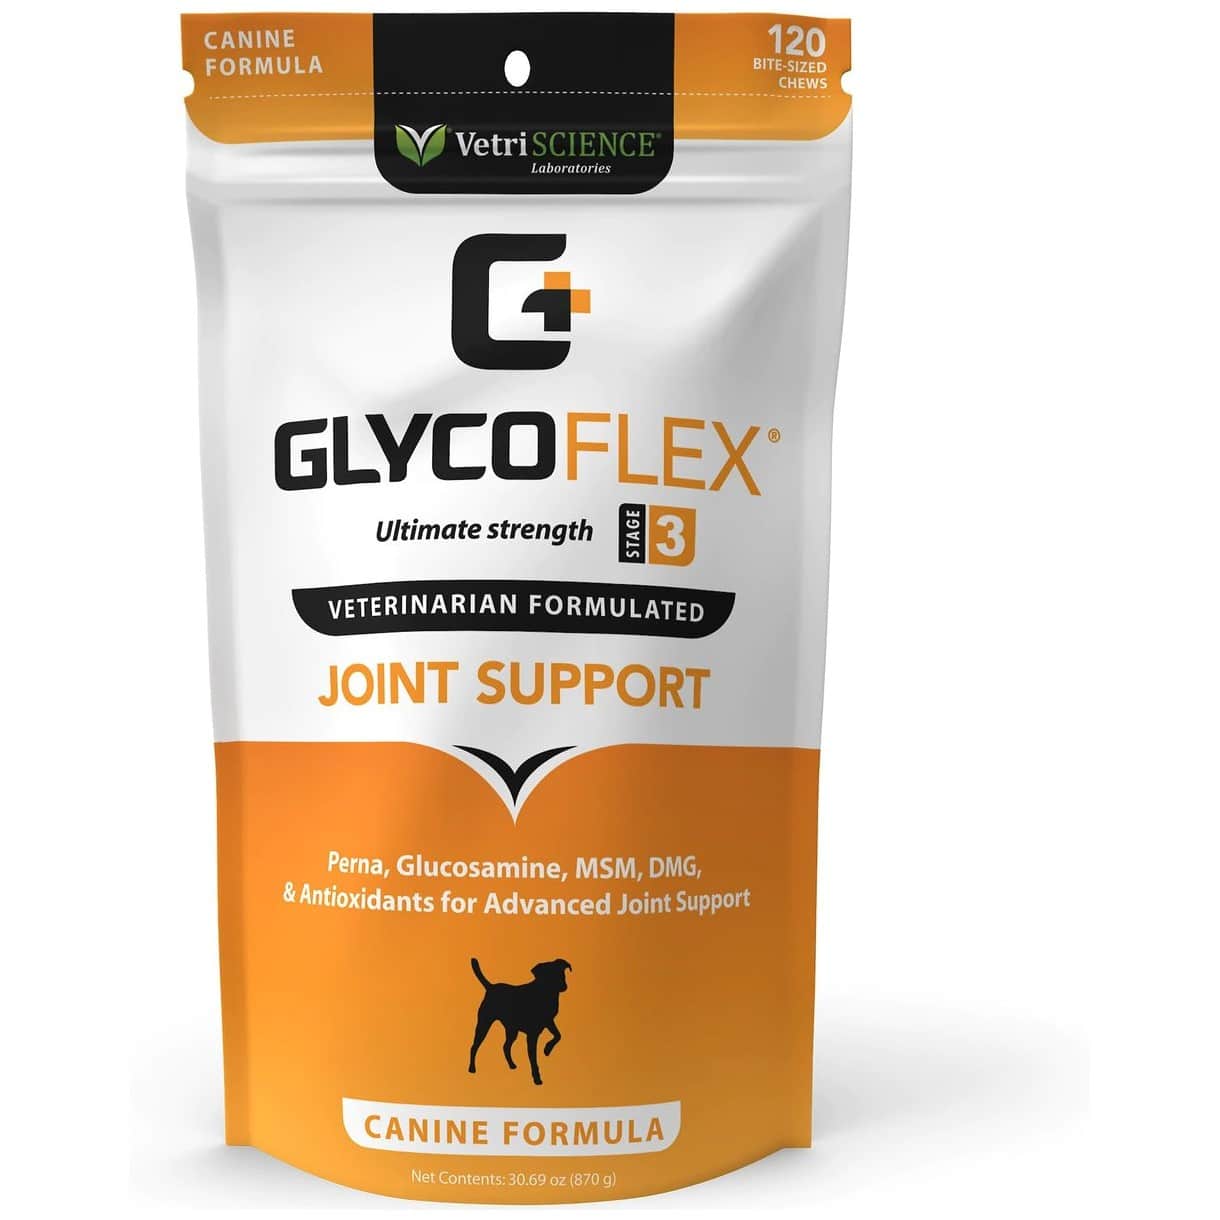 VetriScience GlycoFlex Stage III Chicken Flavored Soft Chews Joint Supplement for Dogs